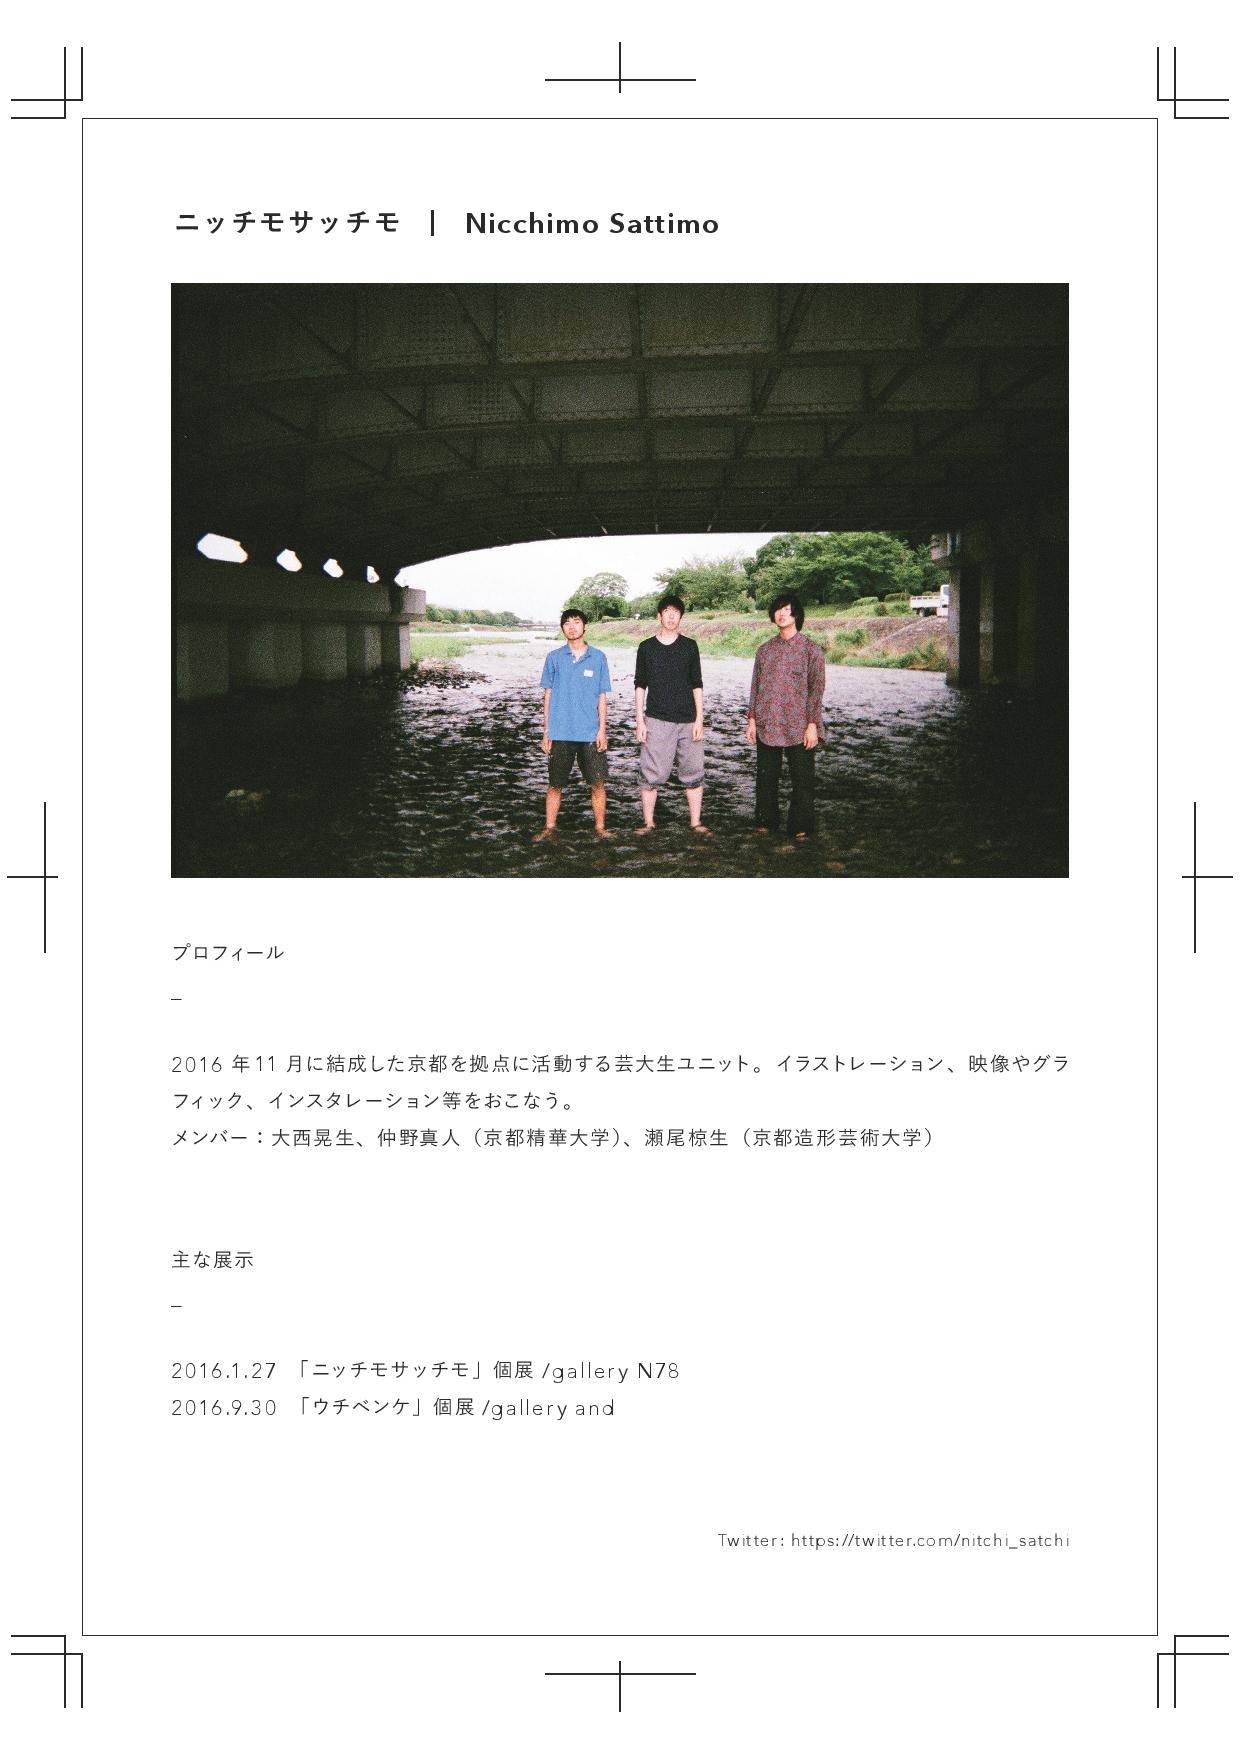 Document-page-001 プロフィール